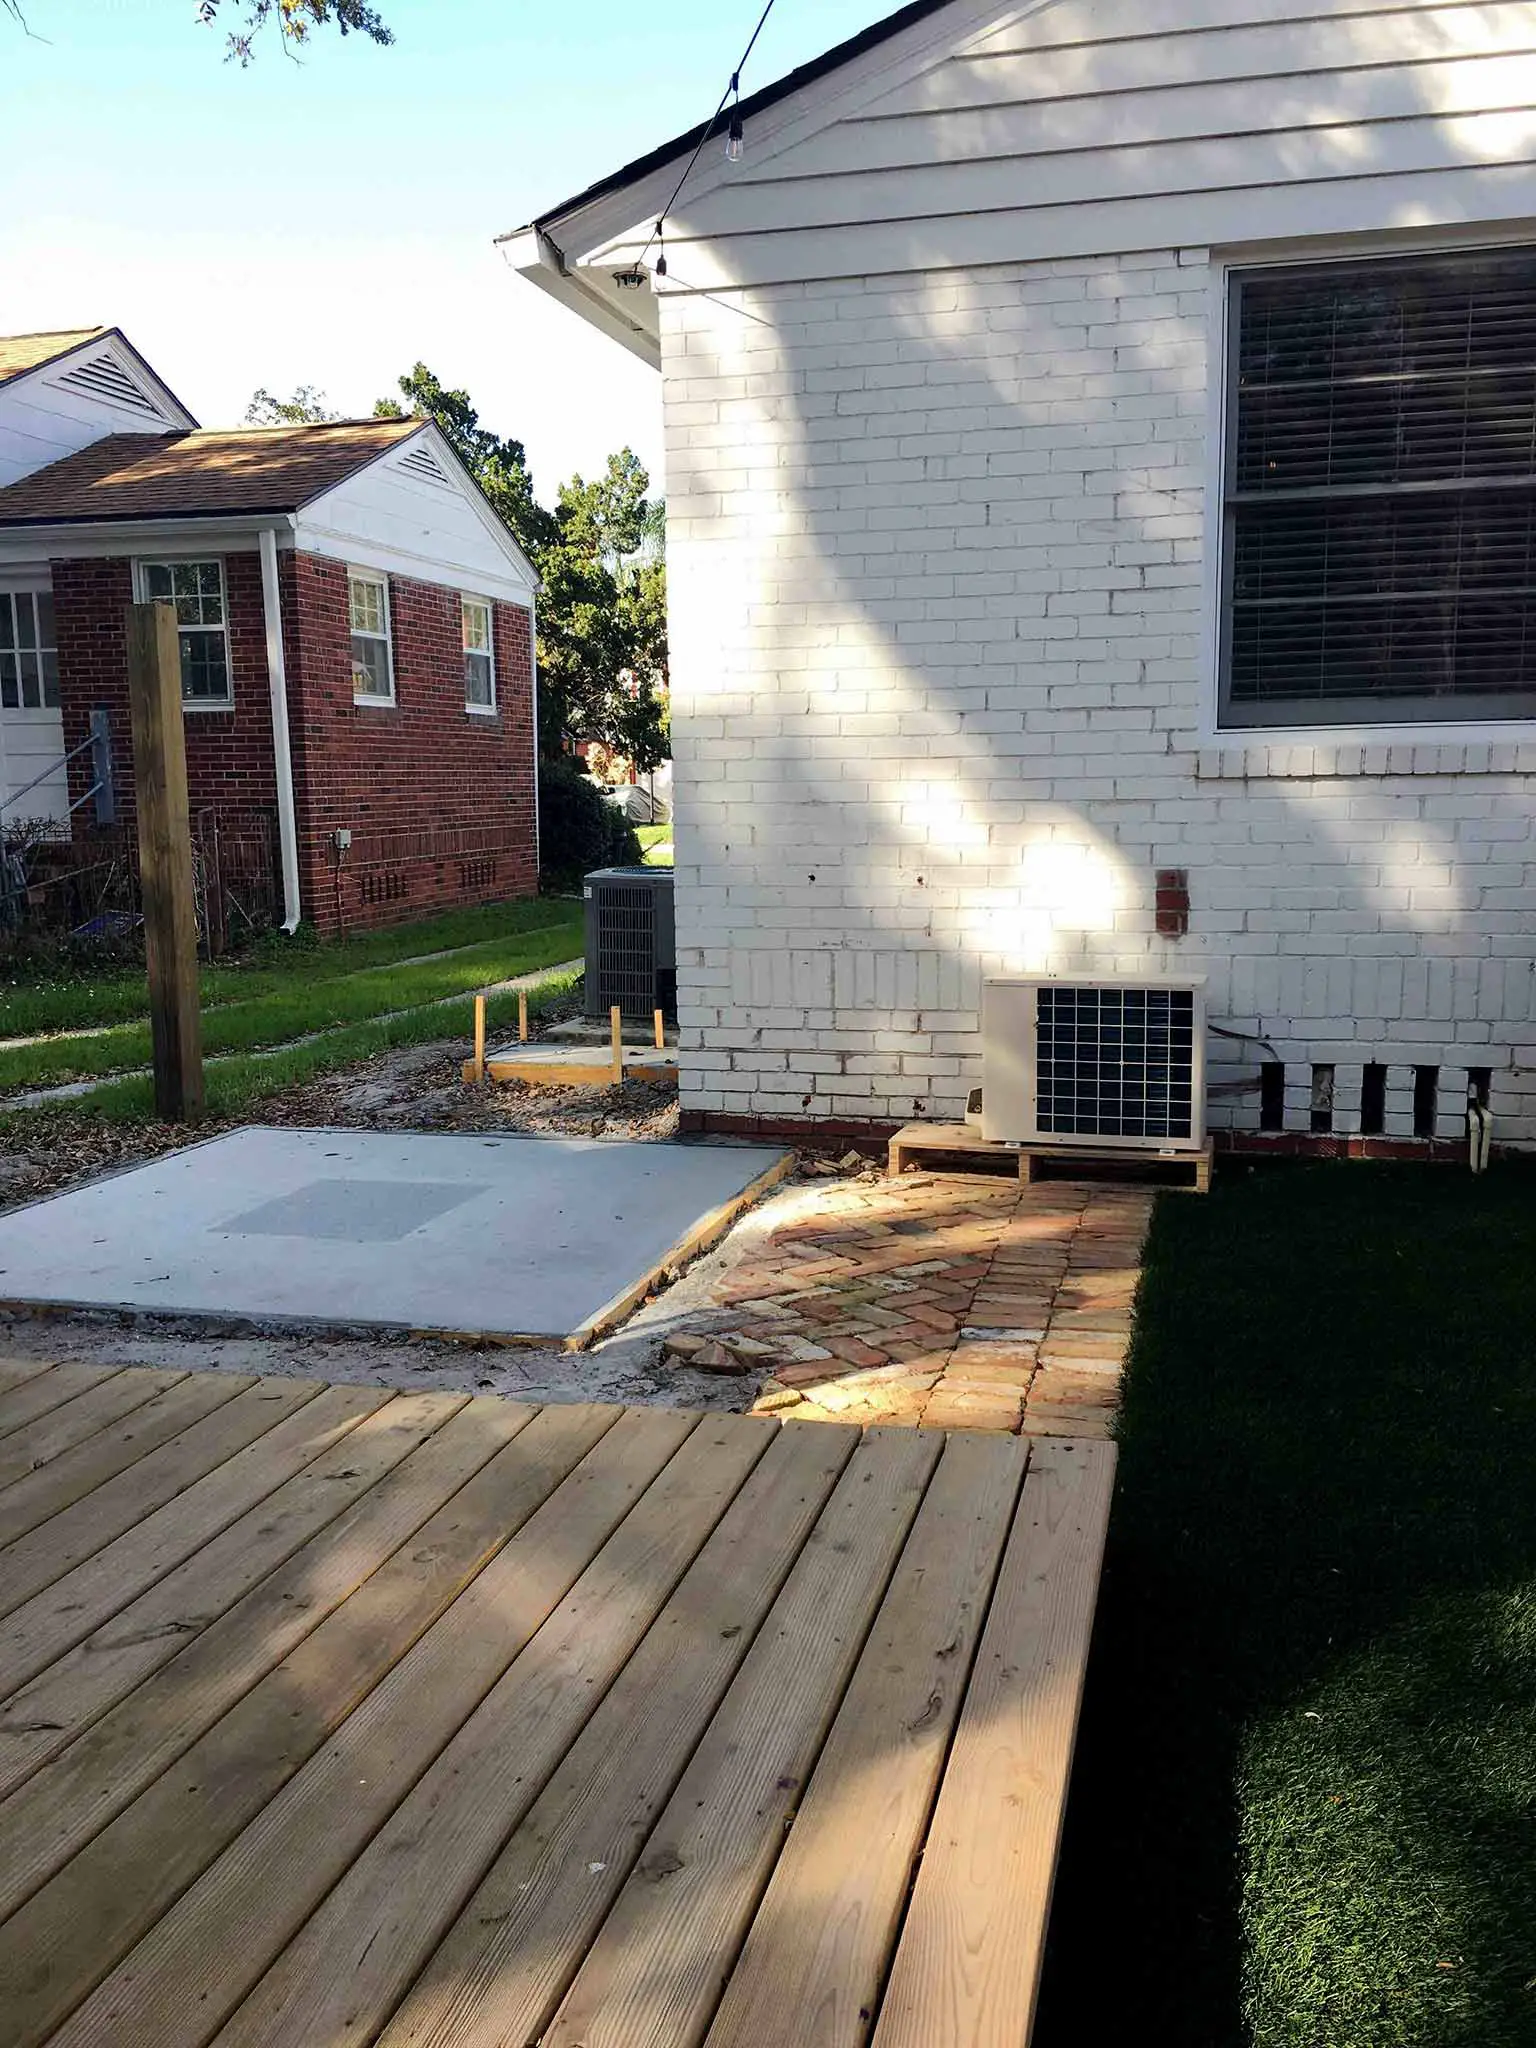 Space for the hot tub - How we planned our backyard space - That Homebird Life Blog